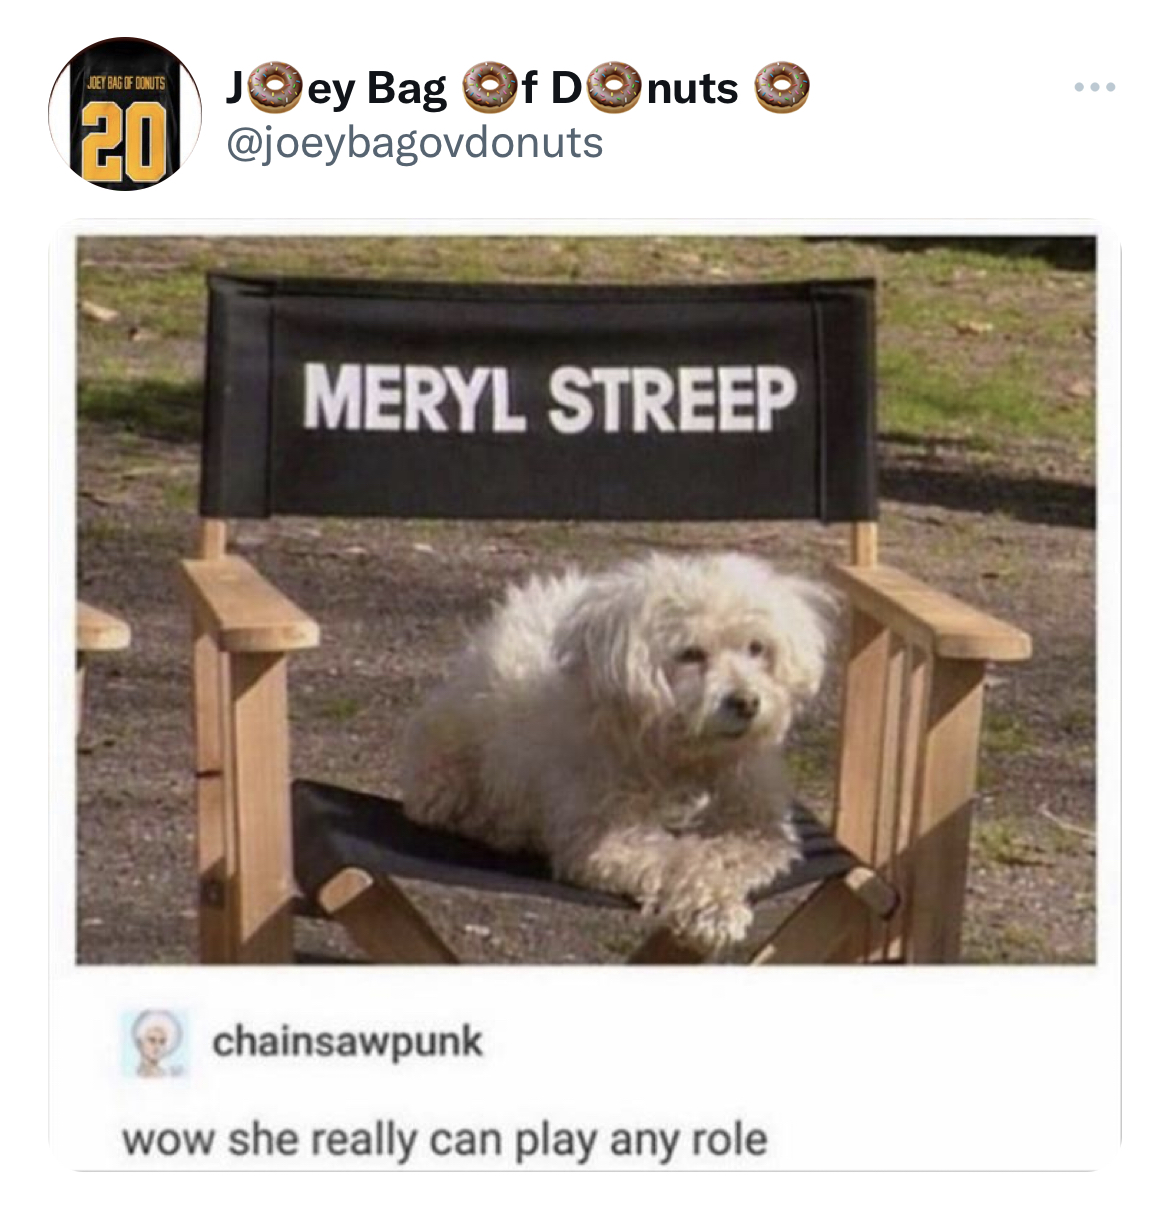 Tweets dunking on celebs - dog - 20 Joey Bag Of Donuts Meryl Streep chainsawpunk wow she really can play any role www